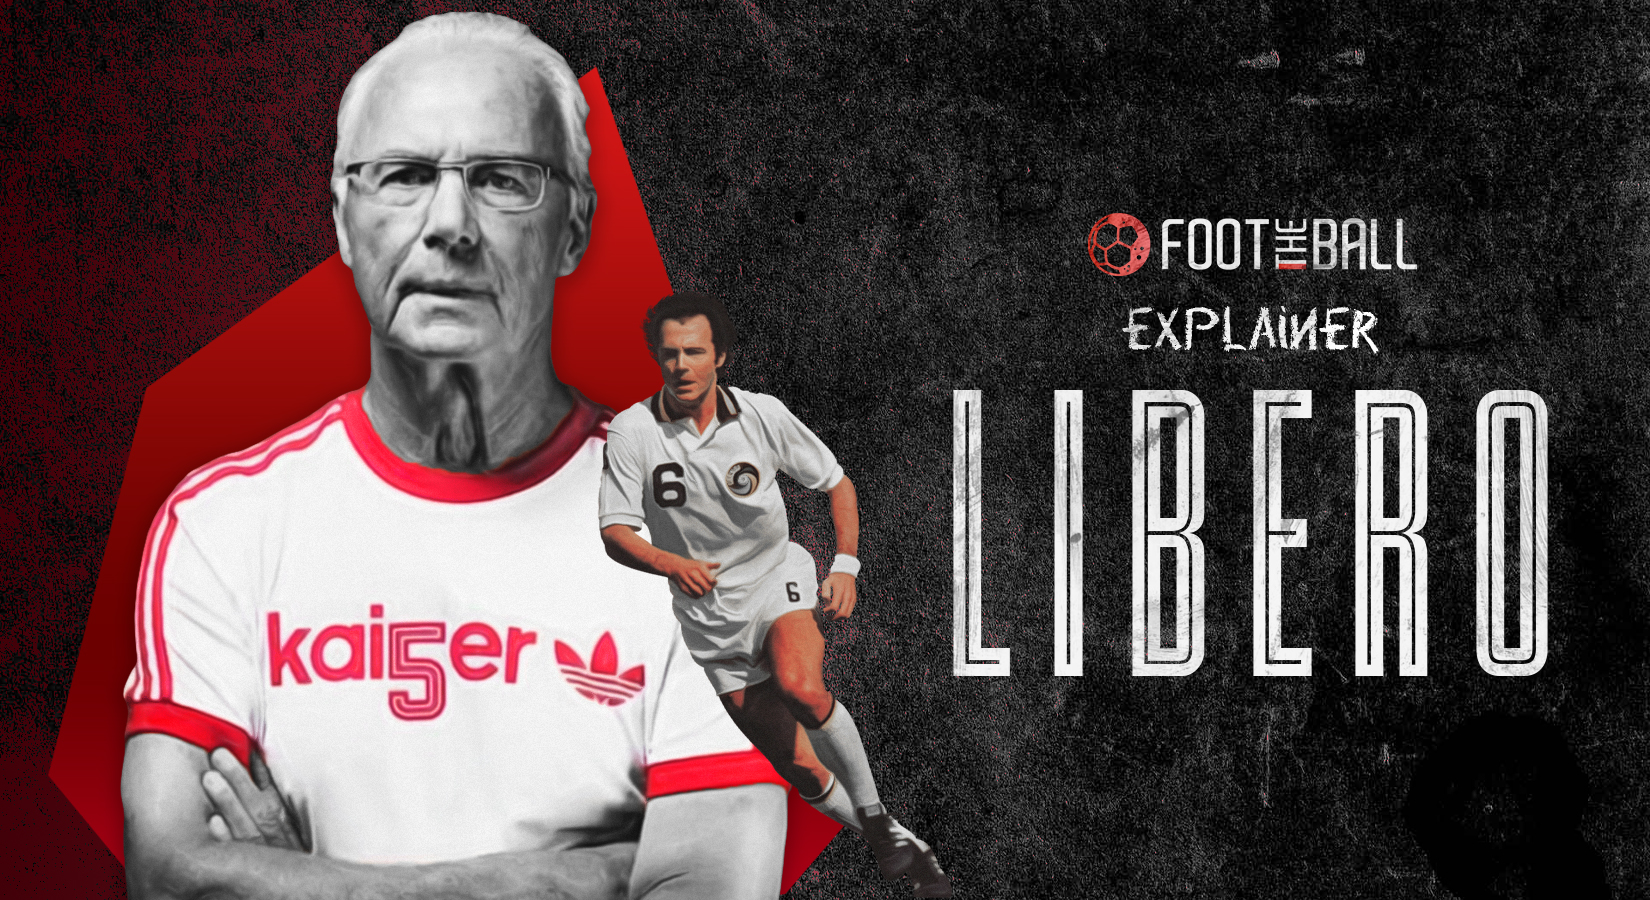 Explained: The Libero Position In Football And It's History